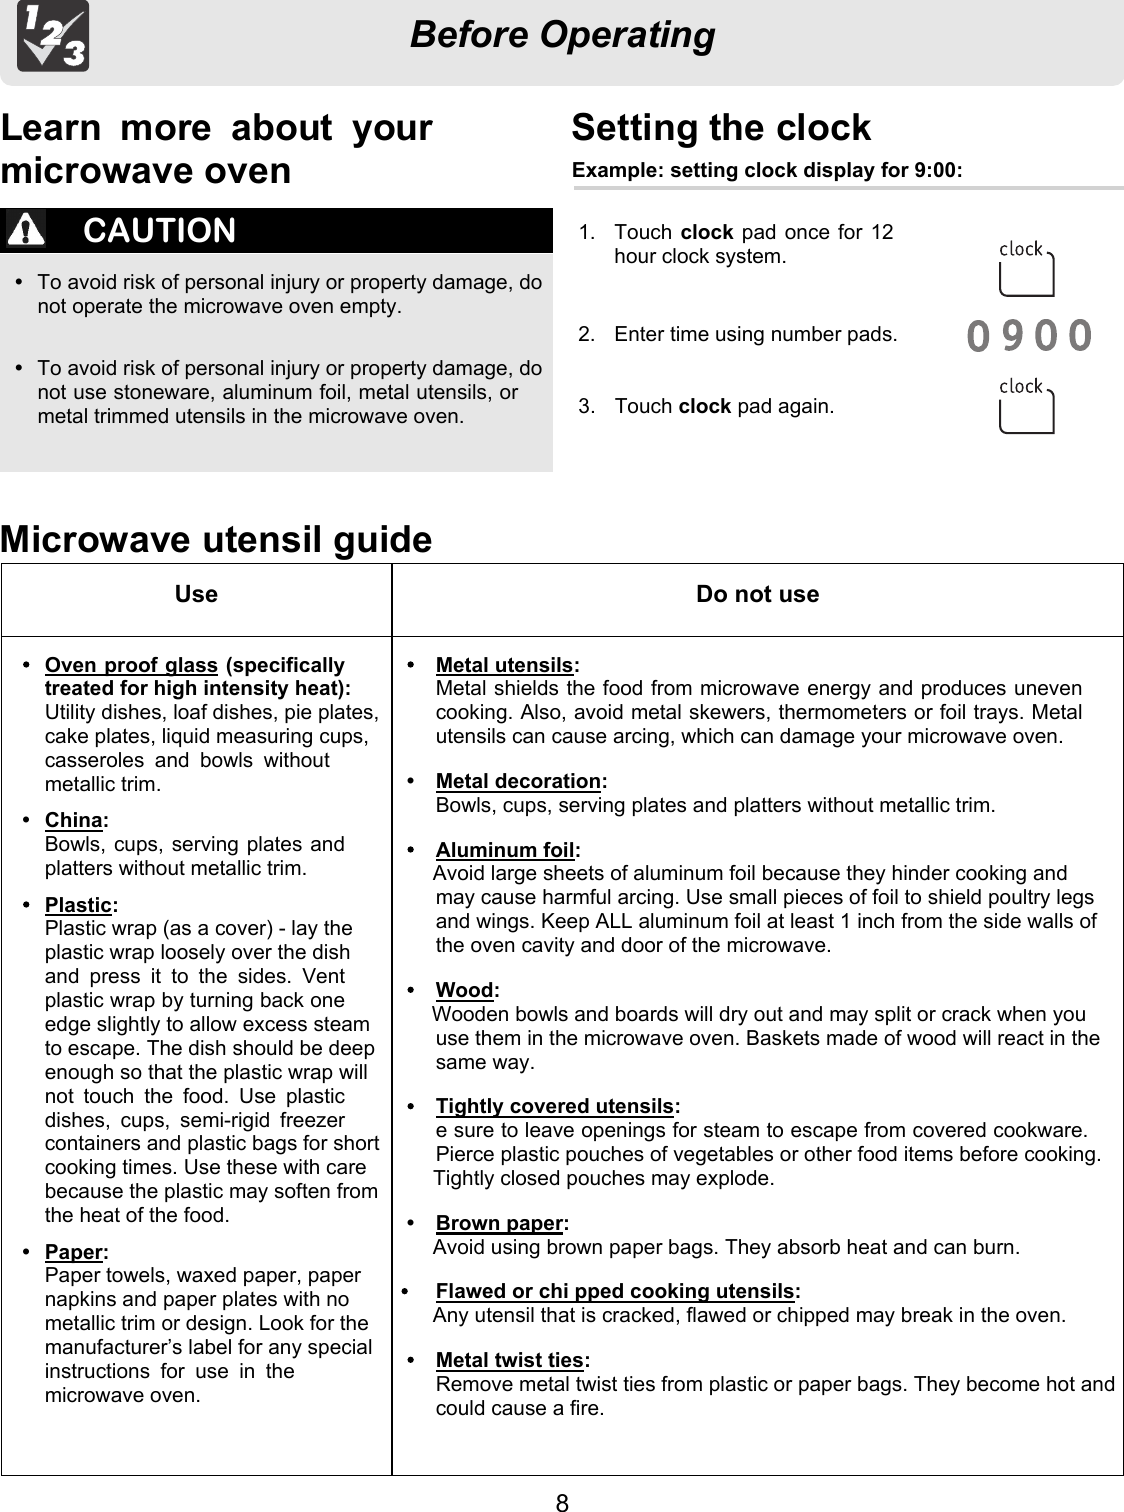 Before OperatingMicrowave utensil guideCAUTIONŸ  To avoid risk of personal injury or property damage, donot operate the microwave oven empty.Ÿ  To avoid risk of personal injury or property damage, donot use stoneware, aluminum foil, metal utensils, ormetal trimmed utensils in the microwave oven.Use Do not useOven proof glass (specificallytreated for high intensity heat):Utility dishes, loaf dishes, pie plates,cake plates, liquid measuring cups,casseroles  and  bowls  withoutmetallic trim.ŸChina:Bowls, cups, serving plates andplatters without metallic trim.Plastic:Plastic wrap (as a cover) - lay theplastic wrap loosely over the dishand  press  it  to  the  sides.  Ventplastic wrap by turning back oneedge slightly to allow excess steamto escape. The dish should be deepenough so that the plastic wrap willnot  touch  the  food.  Use  plasticdishes,  cups,  semi-rigid  freezercontainers and plastic bags for shortcooking times. Use these with carebecause the plastic may soften fromthe heat of the food.ŸPaper:Paper towels, waxed paper, papernapkins and paper plates with nometallic trim or design. Look for themanufacturer’s label for any specialinstructions  for  use  in  themicrowave oven.Metal utensils:Metal shields the food from microwave energy and produces unevencooking. Also, avoid metal skewers, thermometers or foil trays. Metalutensils can cause arcing, which can damage your microwave oven.ŸMetal decoration:Bowls, cups, serving plates and platters without metallic trim.Aluminum foil:Avoid large sheets of aluminum foil because they hinder cooking andmay cause harmful arcing. Use small pieces of foil to shield poultry legsand wings. Keep ALL aluminum foil at least 1 inch from the side walls ofthe oven cavity and door of the microwave.Wood:Wooden bowls and boards will dry out and may split or crack when youuse them in the microwave oven. Baskets made of wood will react in thesame way.Tightly covered utensils:e sure to leave openings for steam to escape from covered cookware.Pierce plastic pouches of vegetables or other food items before cooking.Tightly closed pouches may explode.ŸBrown paper:Avoid using brown paper bags. They absorb heat and can burn.Flawed or chi pped cooking utensils:Any utensil that is cracked, flawed or chipped may break in the oven.Metal twist ties:Remove metal twist ties from plastic or paper bags. They become hot andcould cause a fire.Setting the clock1.  Touch clock pad once for 12hour clock system. 2.  Enter time using number pads.clock pad again.Learn  more  about  yourmicrowave oven Example: setting clock display for 9:00:Touch83. 